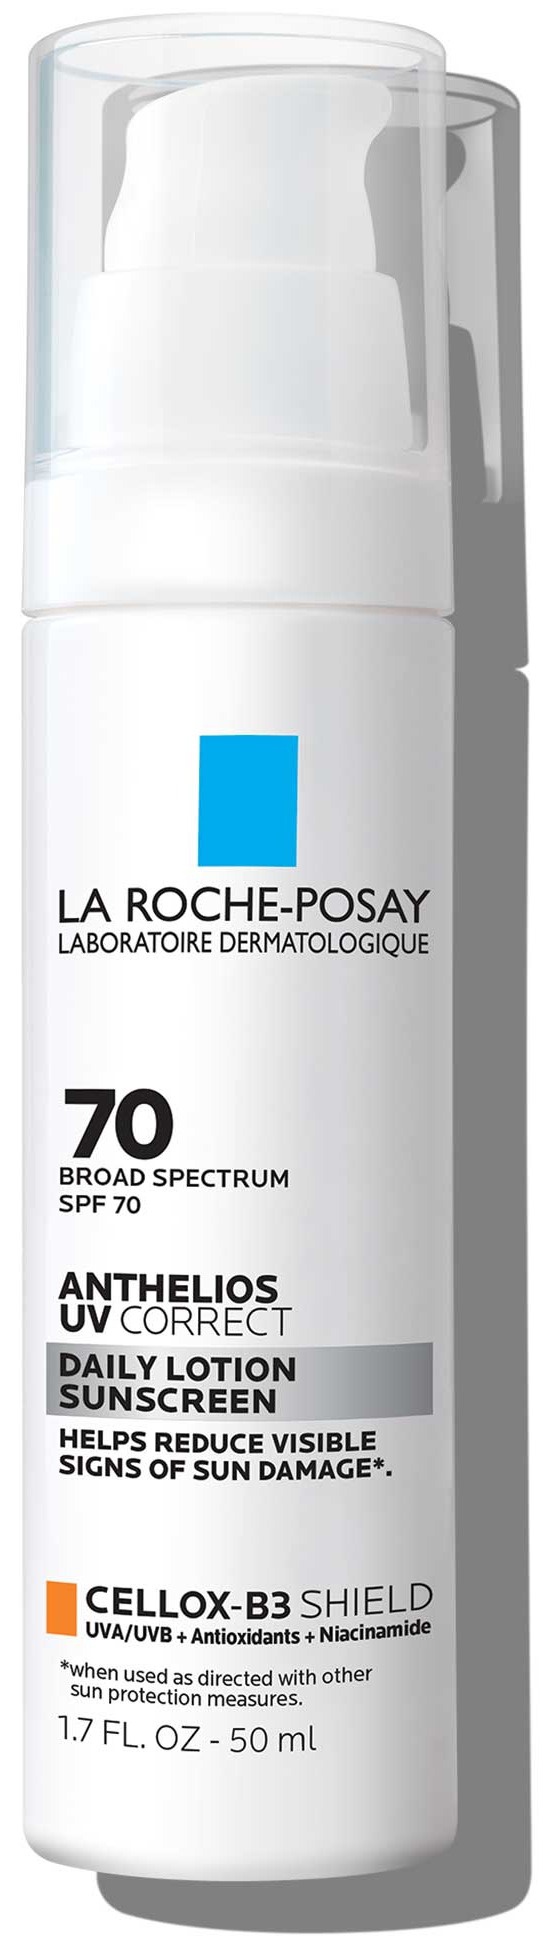 La Roche-Posay Anthelios Anthelios UV Correct Daily Lotion SPF70